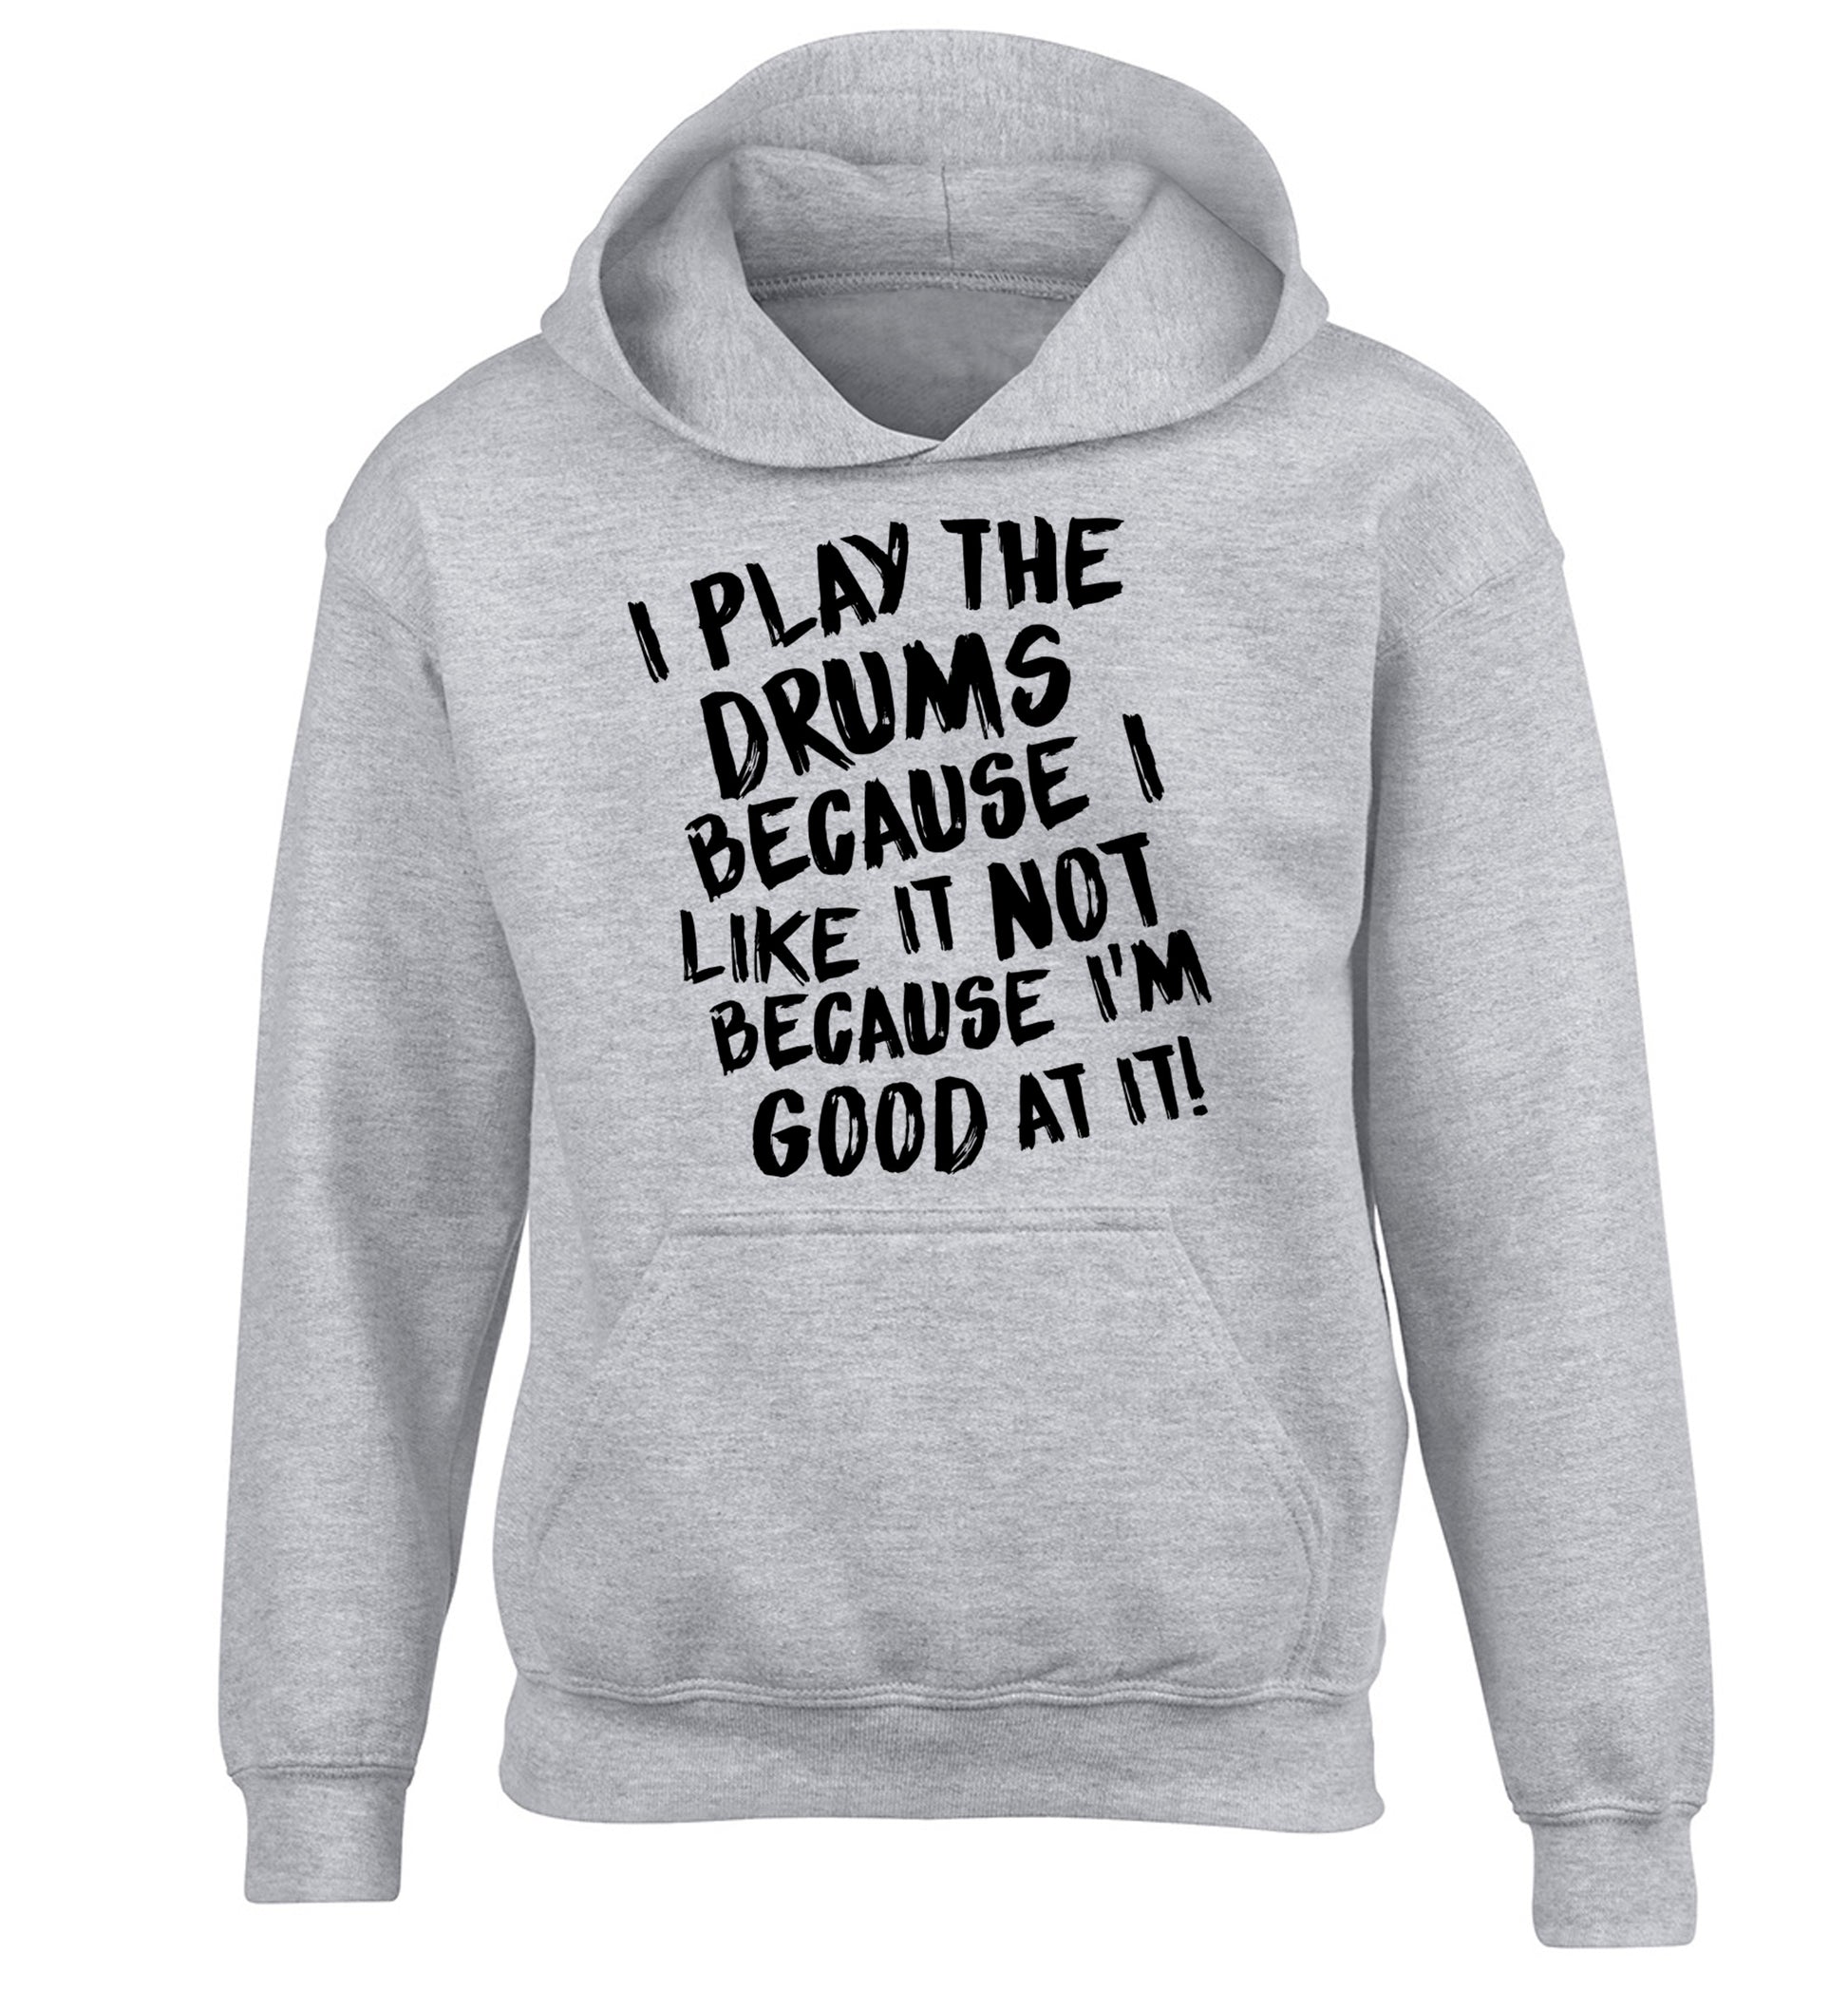 I play the drums because I like it not because I'm good at it children's grey hoodie 12-14 Years